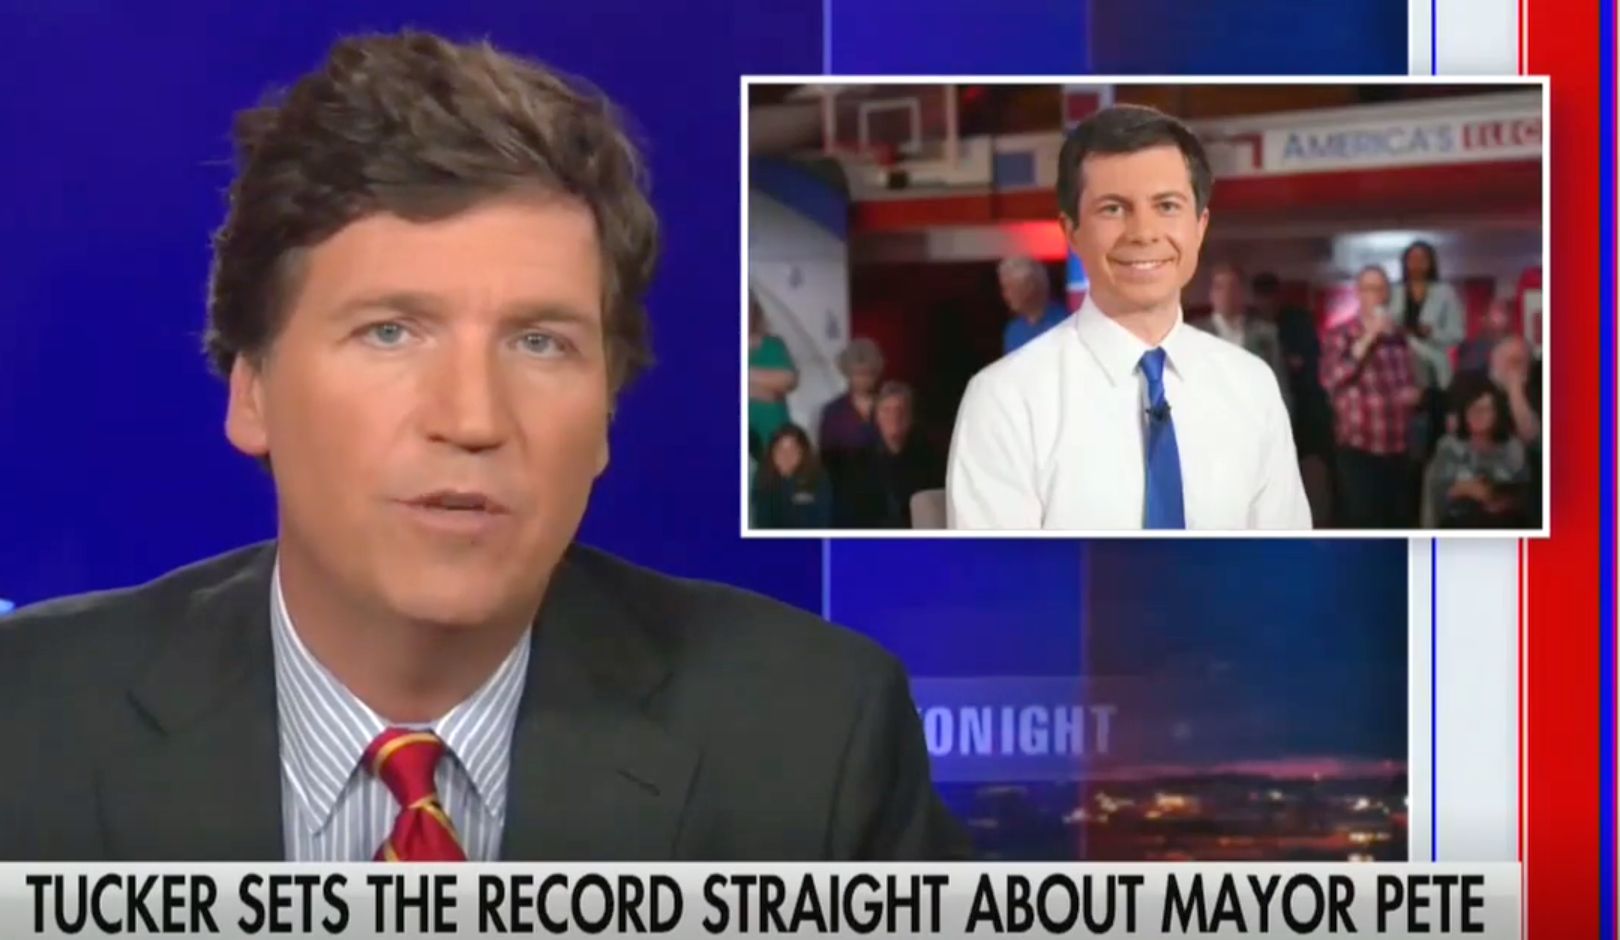 tucker carlson offers most insincere response to pete buttigieg attack backlash 1